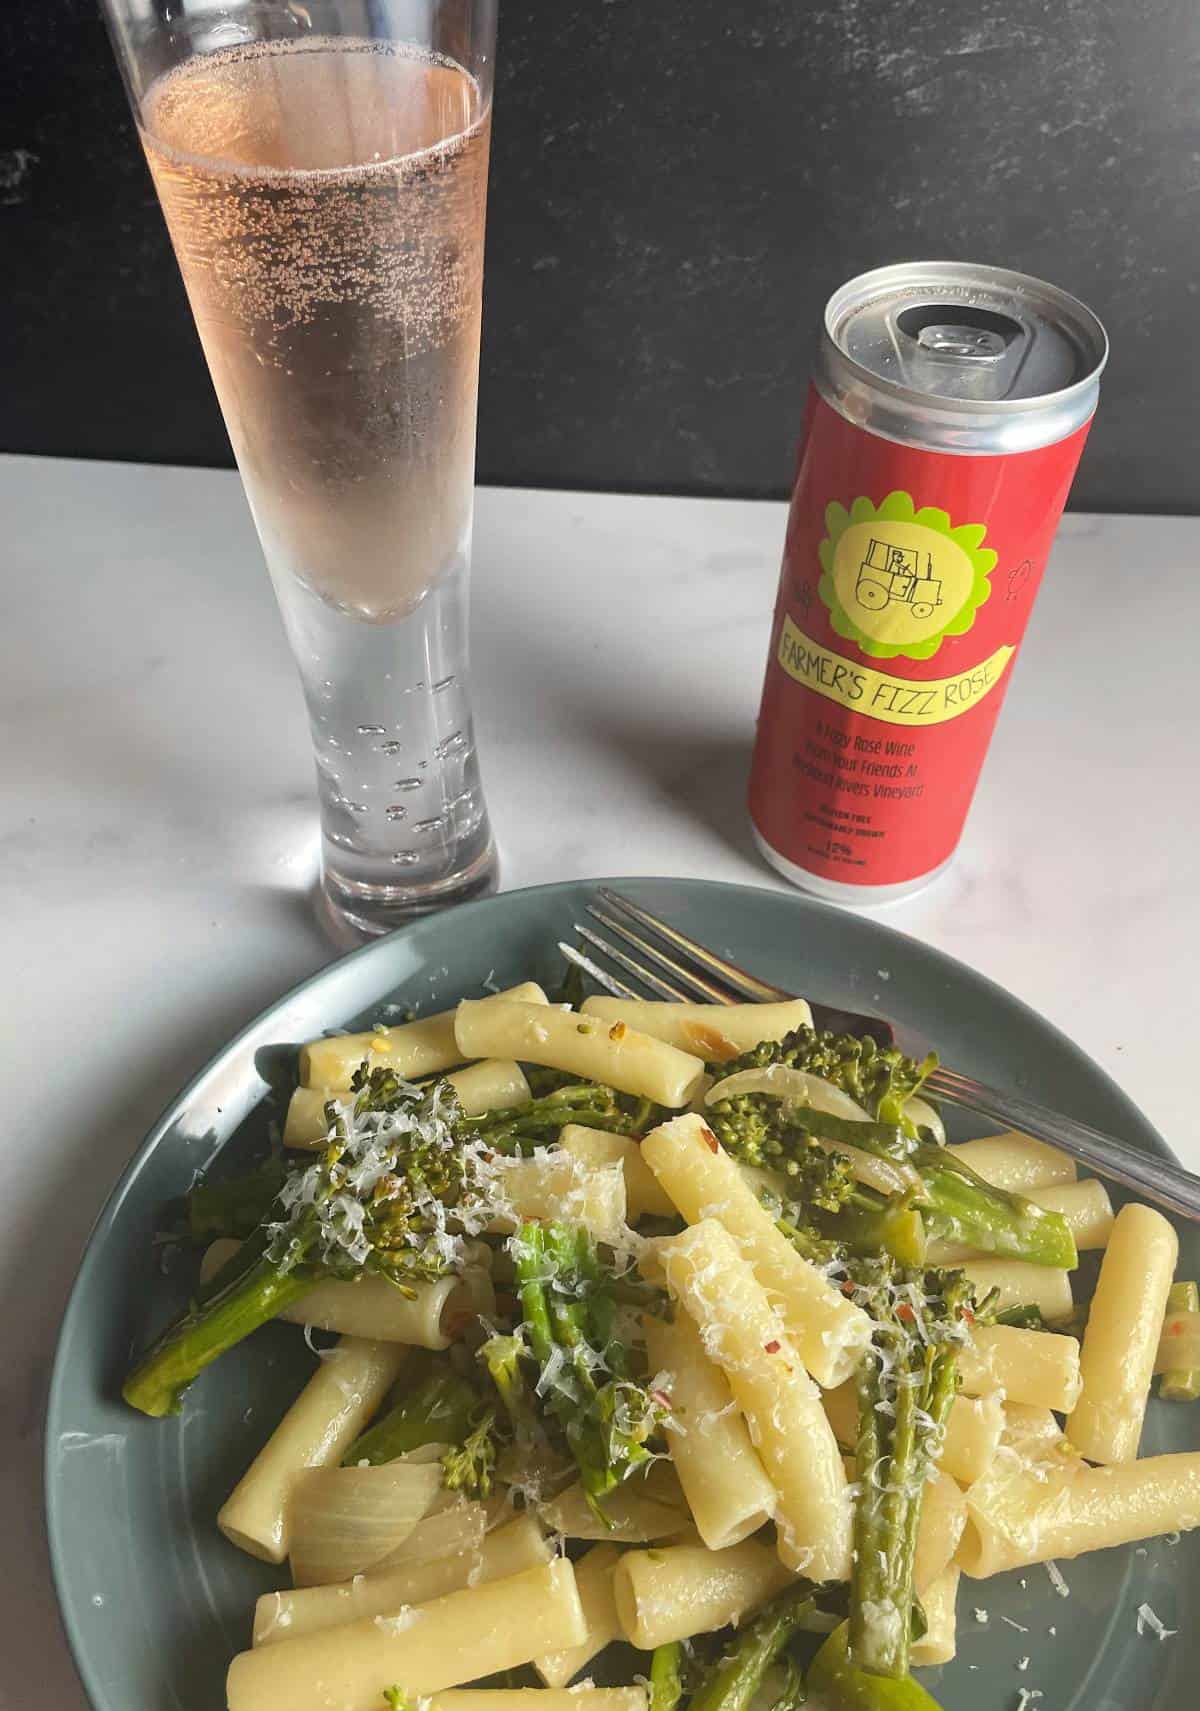 broccolini pasta served with a sparkling rosé wine. The can of this farmer's fizz wine is alongside the glass and plate.